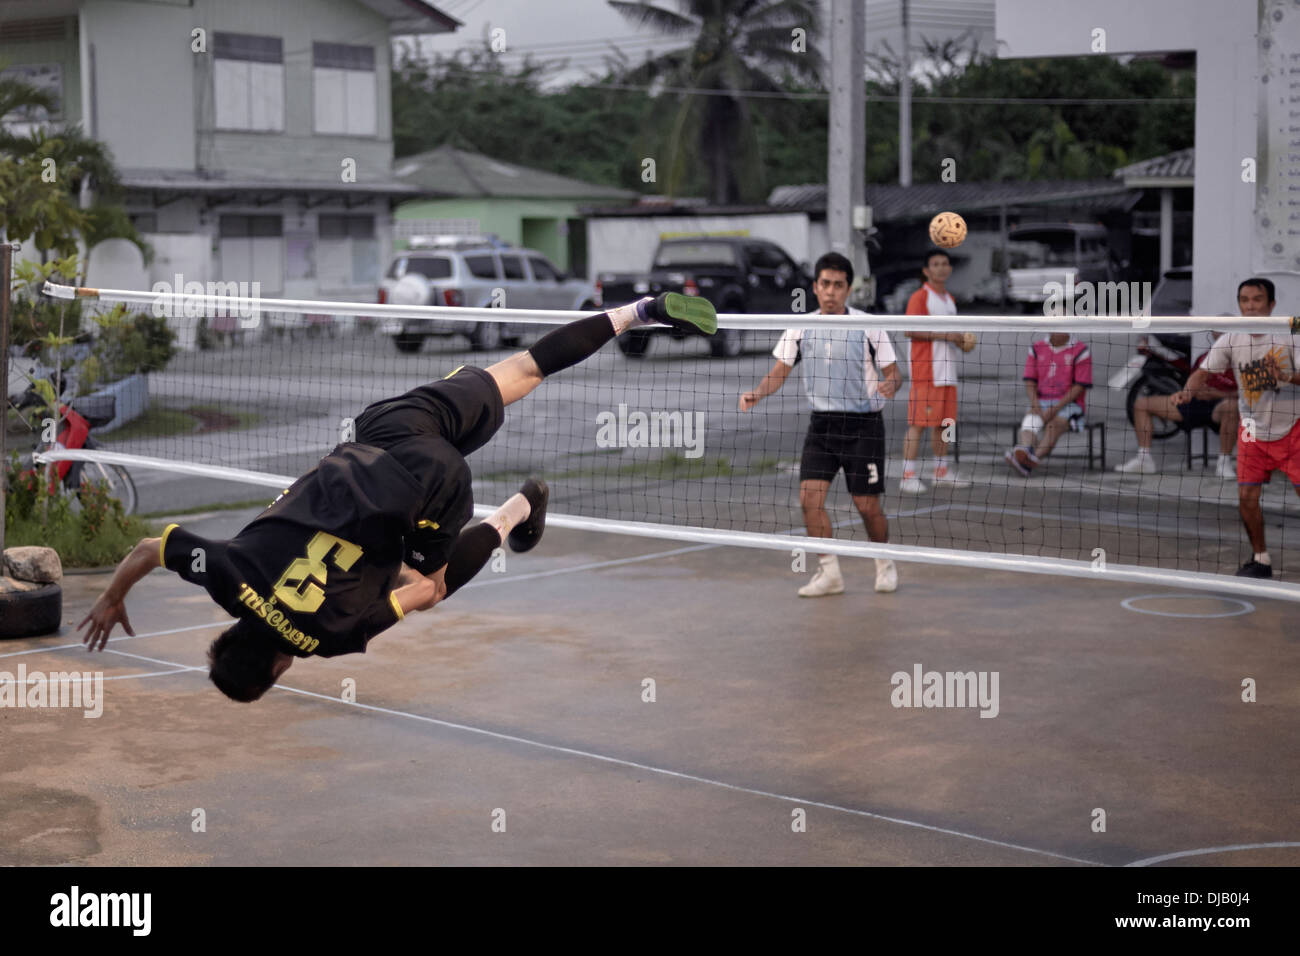 Extreme athleticism during a game of Sepak Takraw. Traditional and popular Thai football game. Thailand S. E. Asia Stock Photo